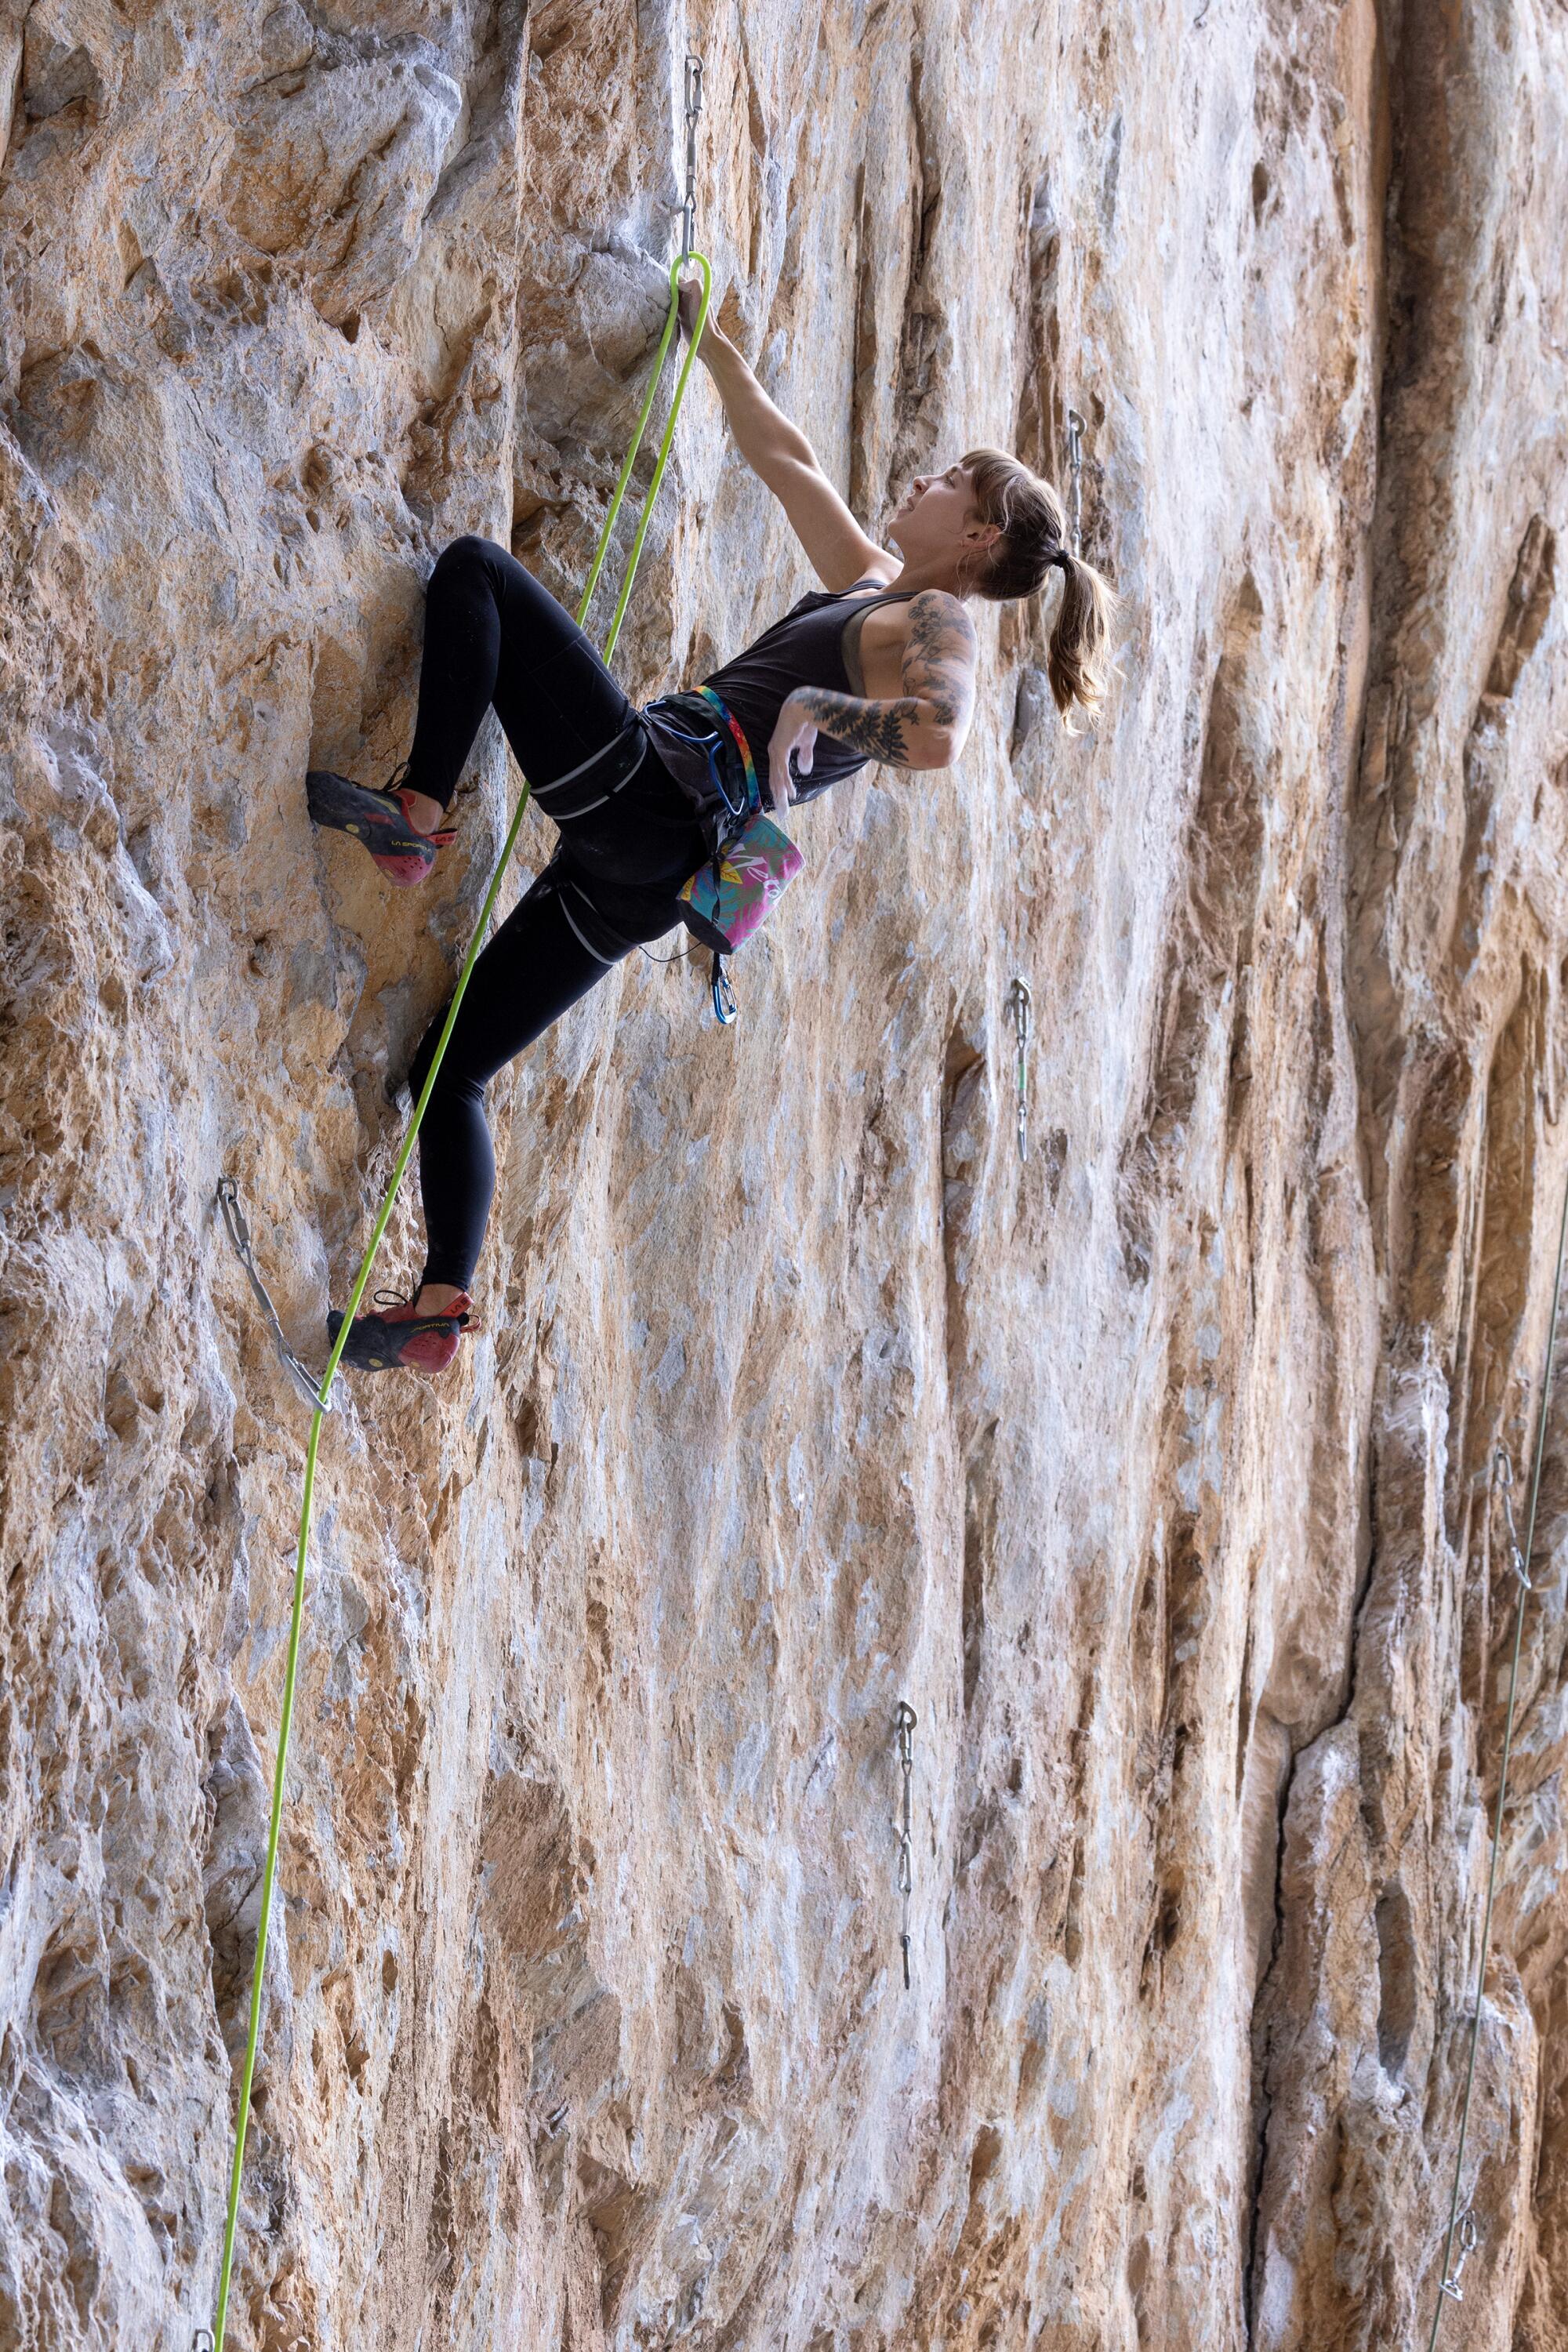 An athletic woman with blond ponytail ascends a sheer limestone wall 